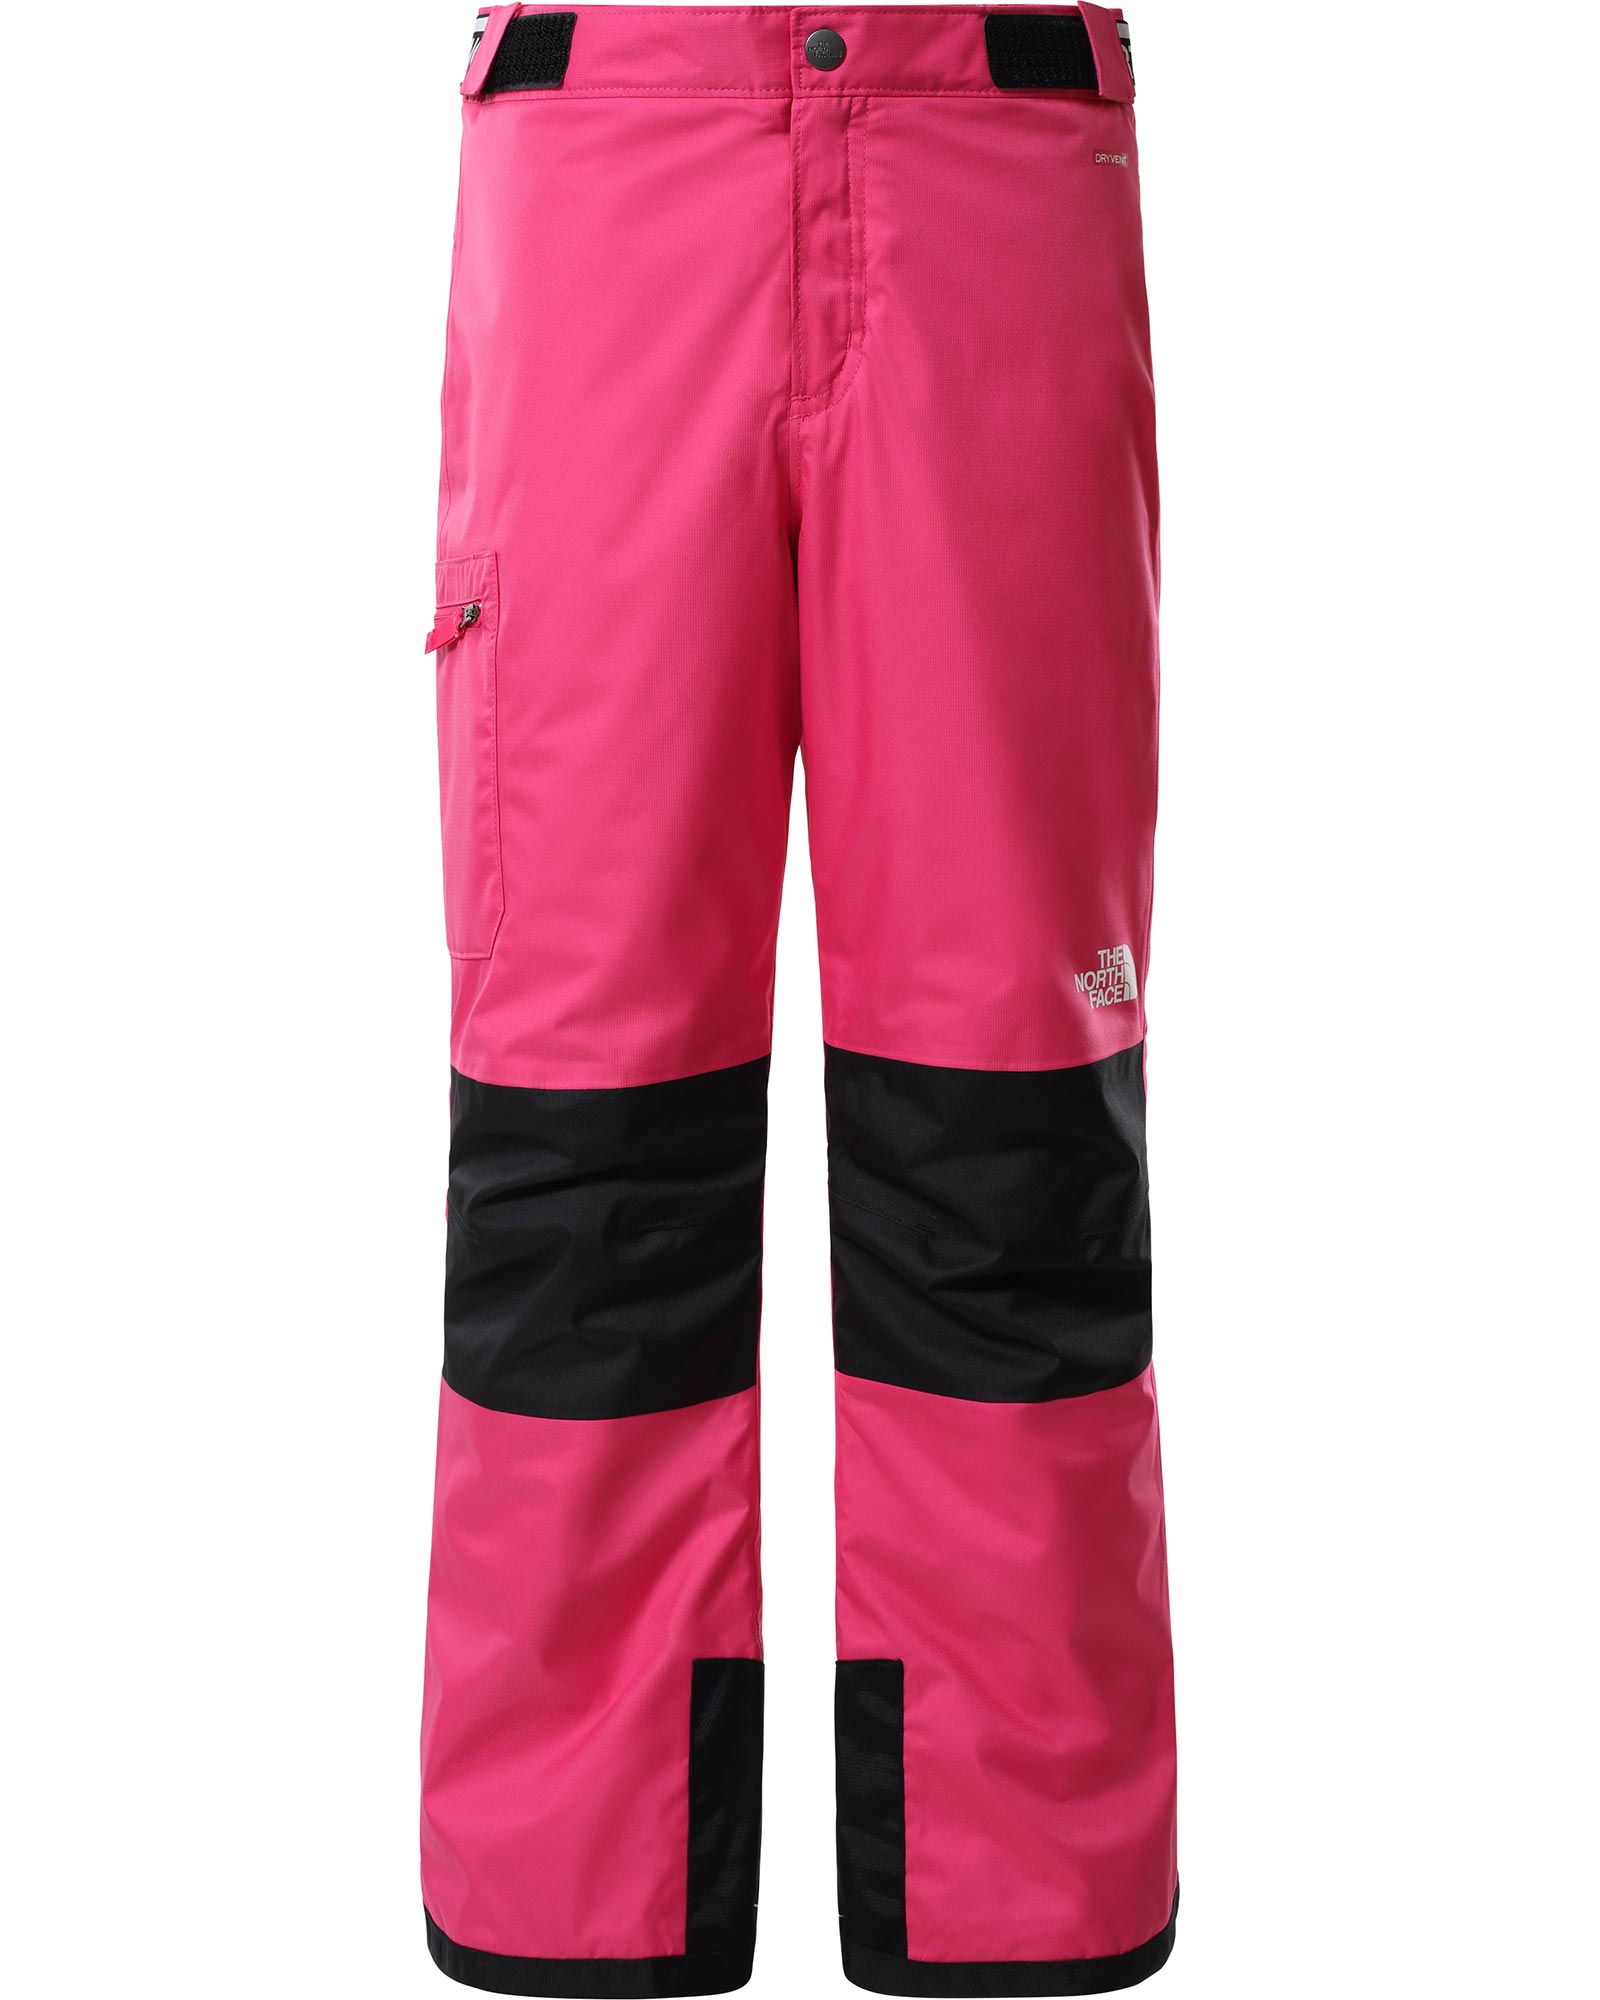 THE NORTH FACE Girls' Freedom Insulated Pant, Cabaret Pink, XXS